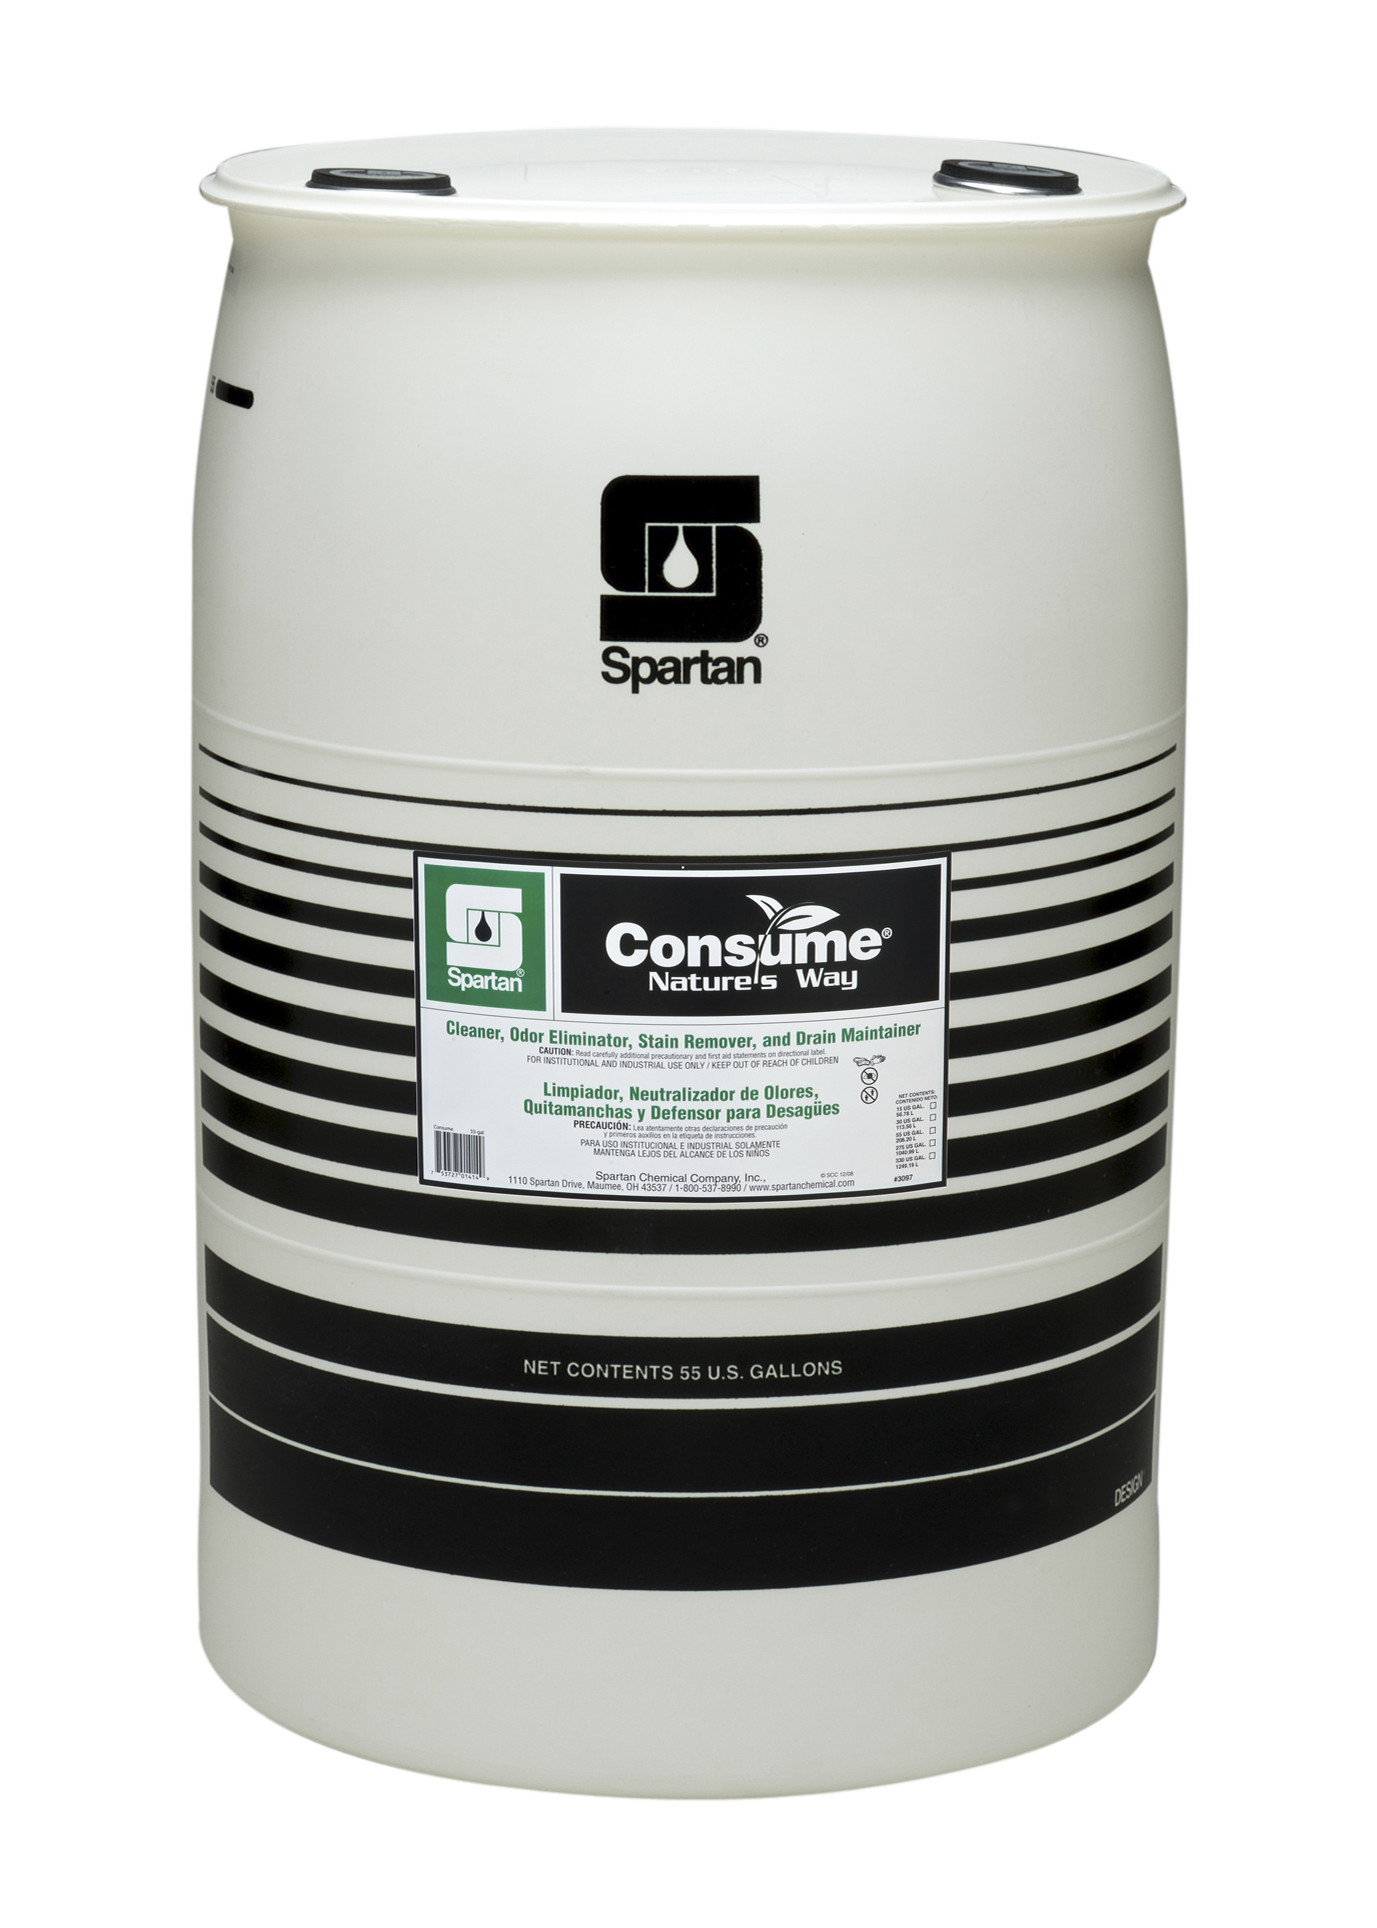 Spartan Chemical Company Consume, 55 GAL DRUM